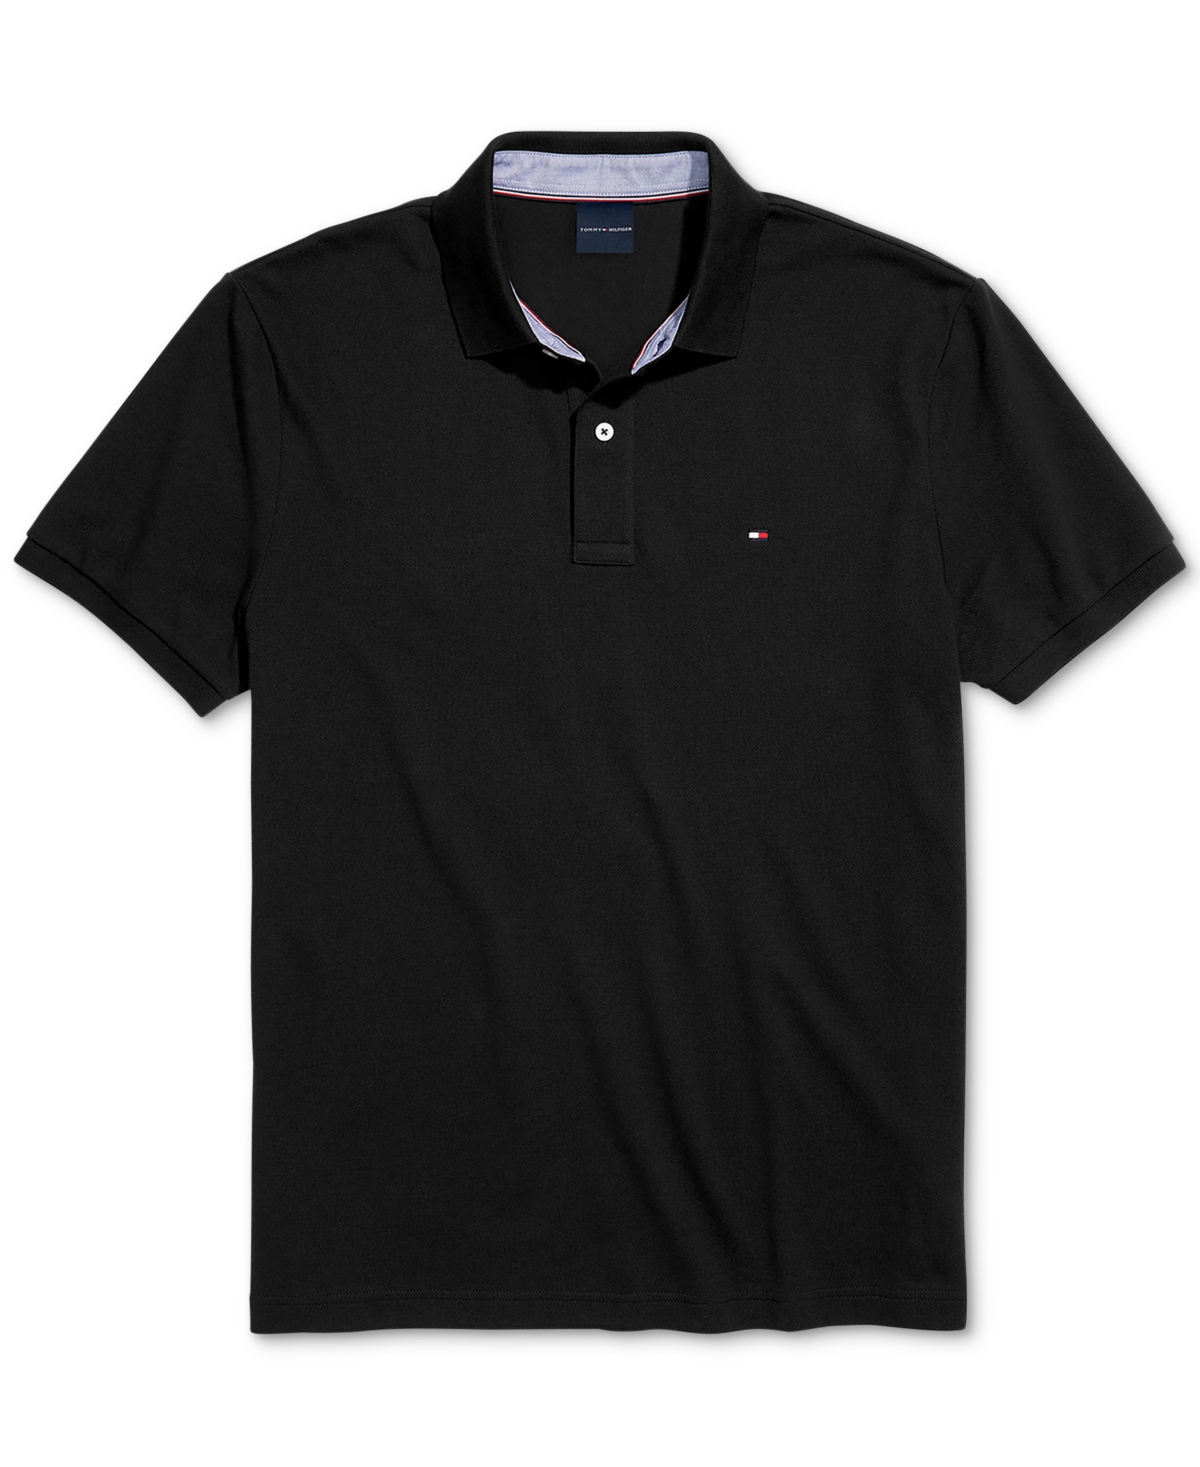 Tommy Hilfiger Adaptive Men's Custom-Fit Ivy Polo Shirt with Magnetic Closure